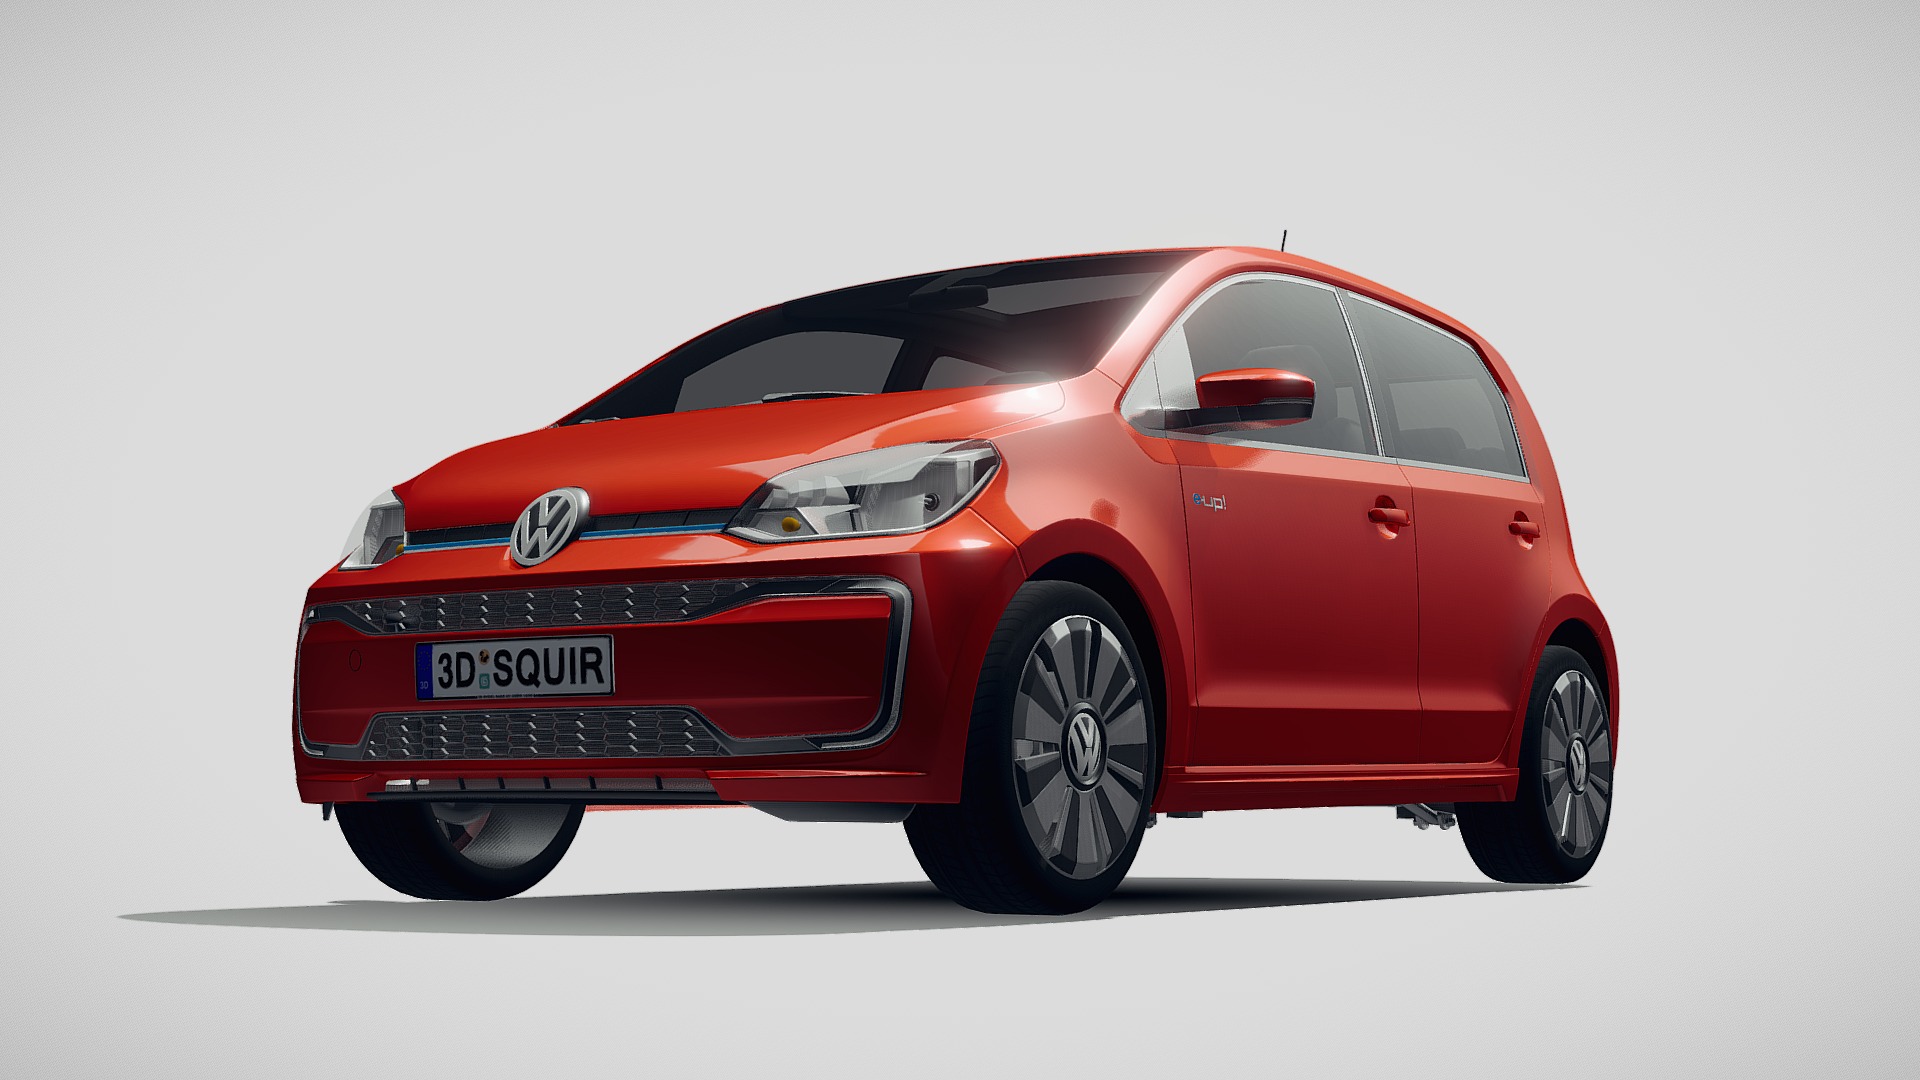 3D model Volkswagen e-UP 2019 - This is a 3D model of the Volkswagen e-UP 2019. The 3D model is about a red car with a white background.